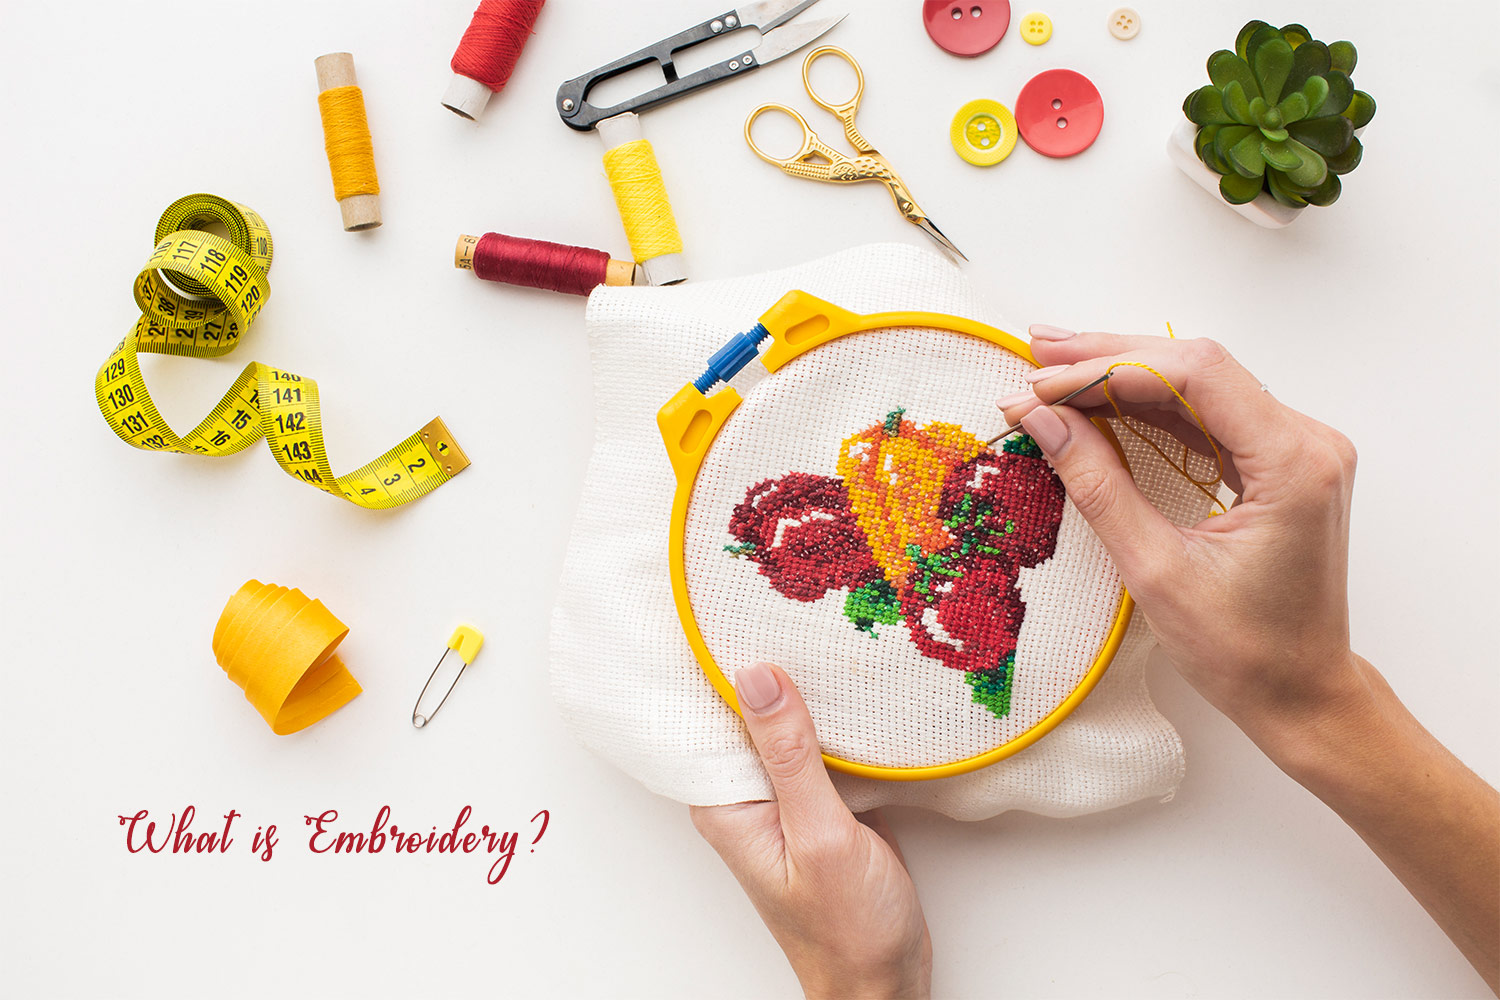 What is Embroidery? A little guide for embroidery material